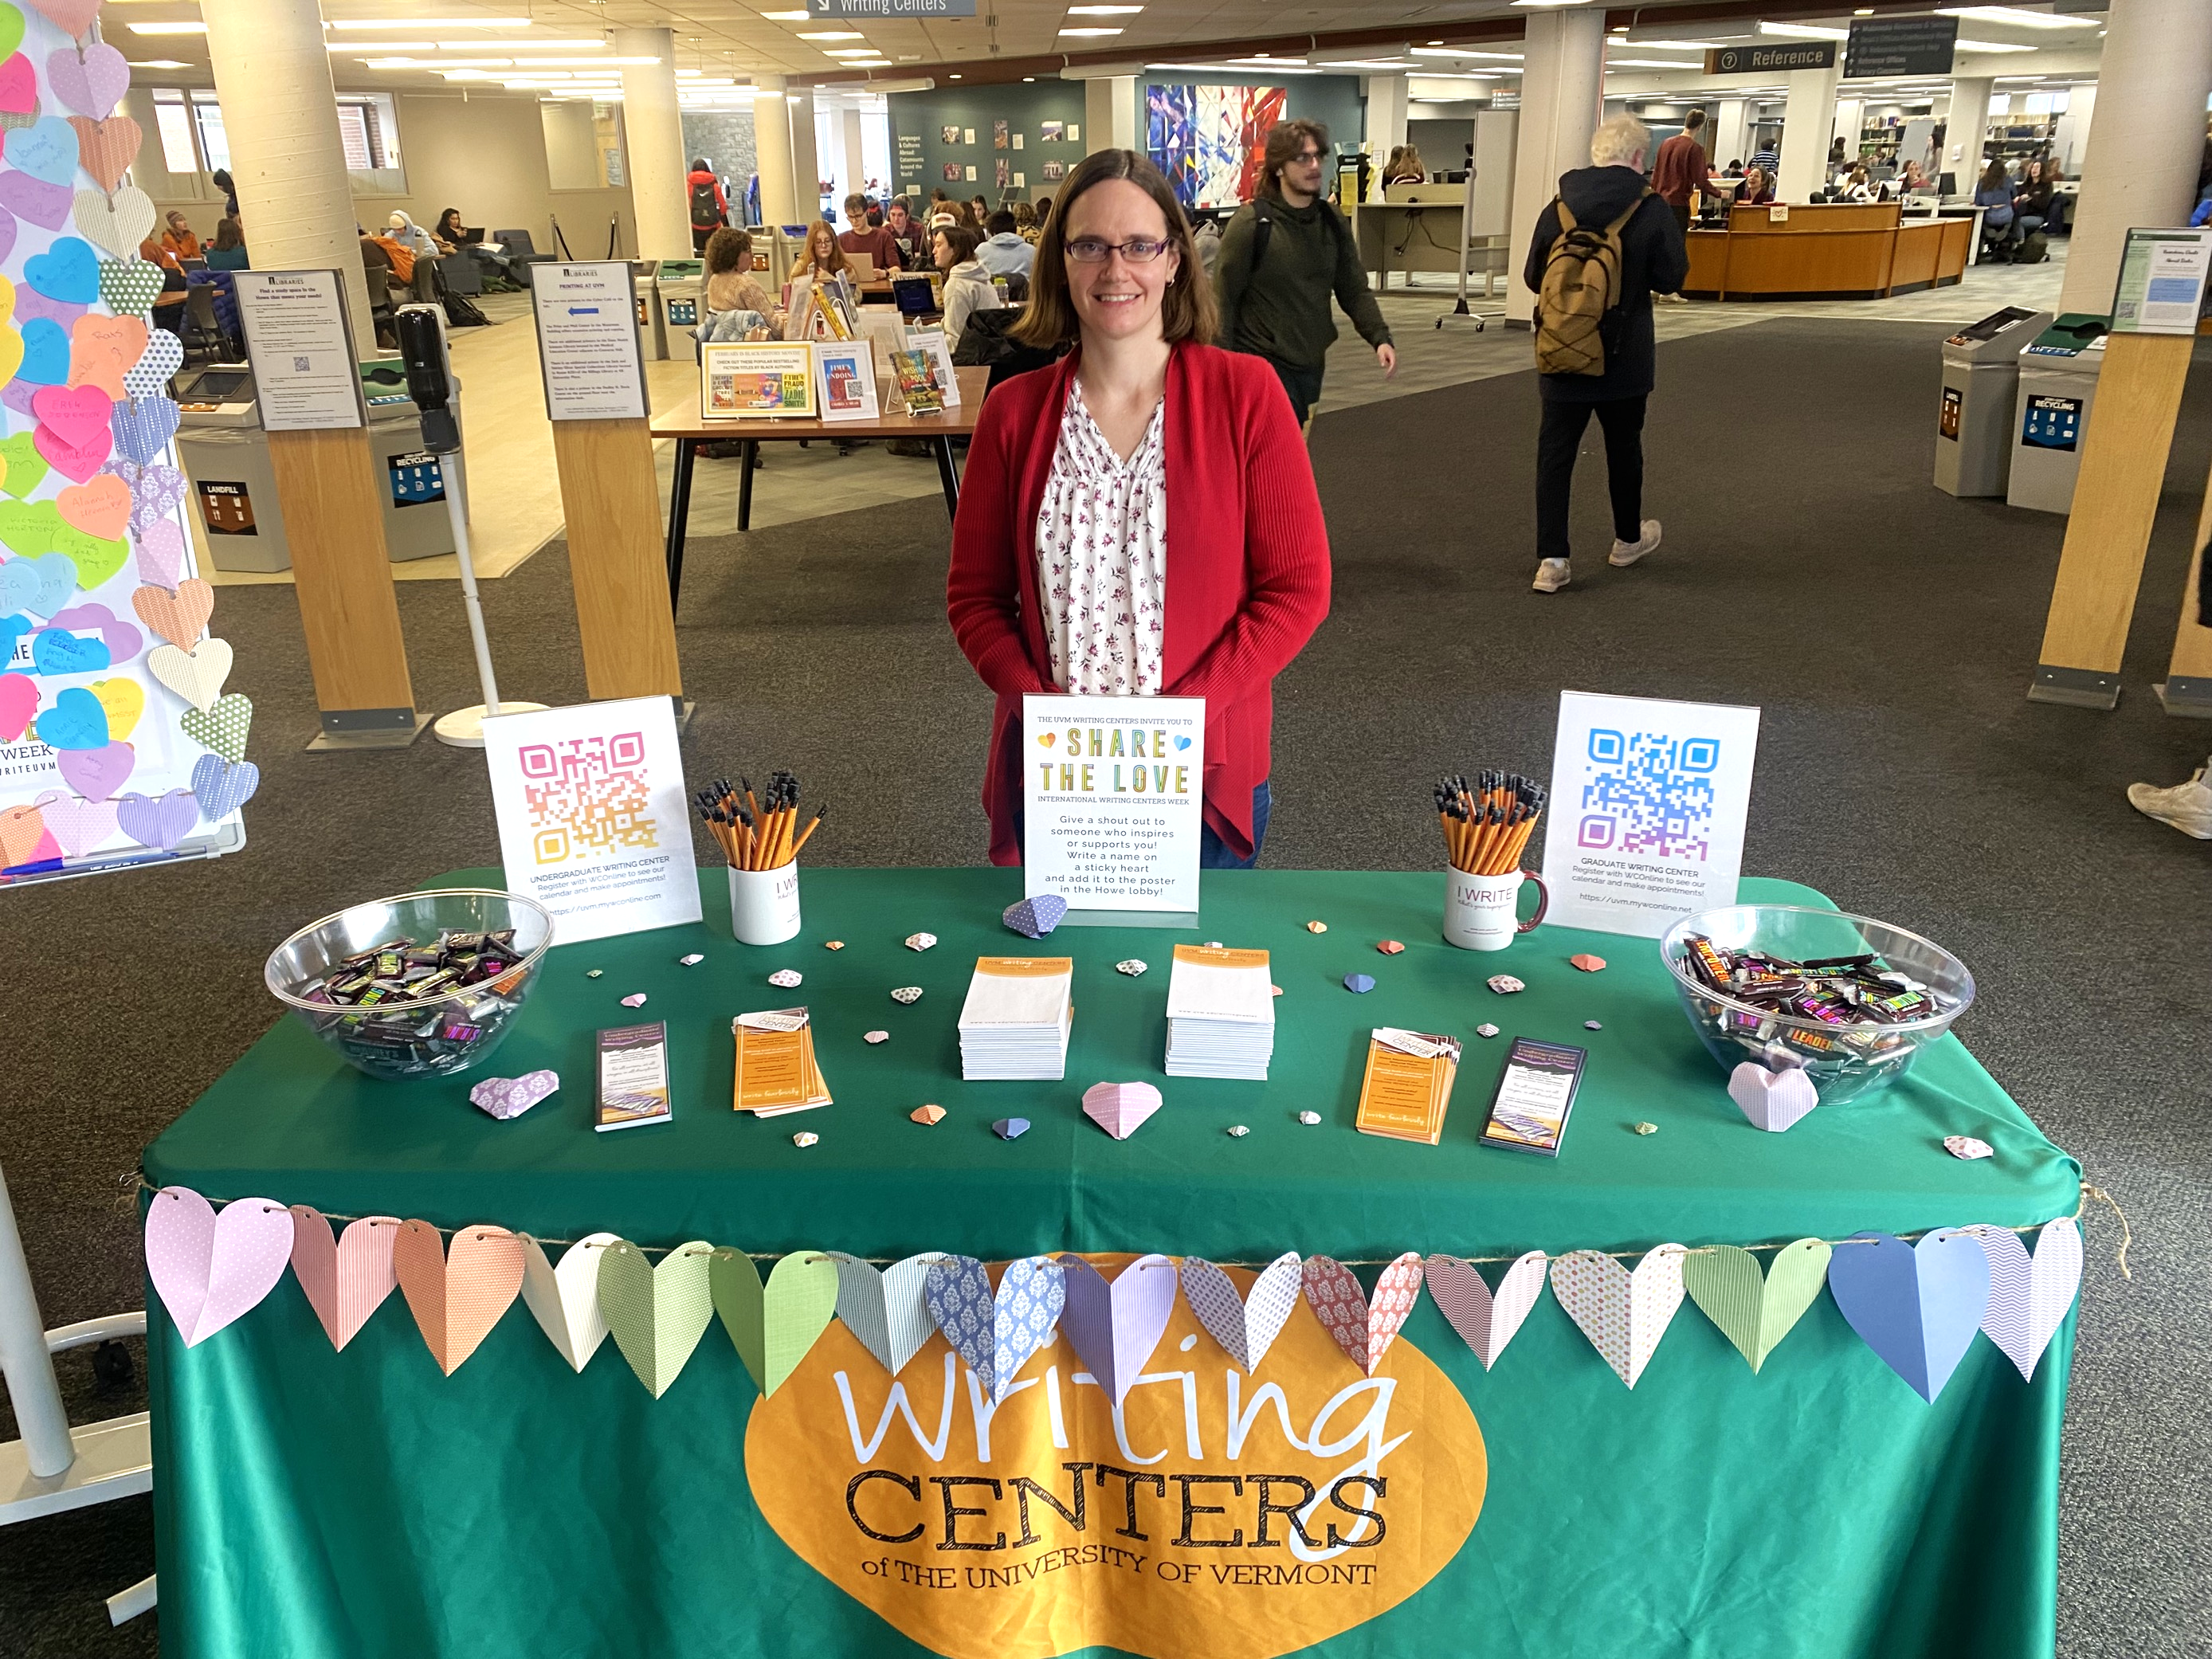 April Christenson stands behind a table draped with the writing centers' table cloth. The table displays two bowls of chocolates, origami hearts, and QR codes. A banner of paper hearts is strung across the front of the tablecloth.